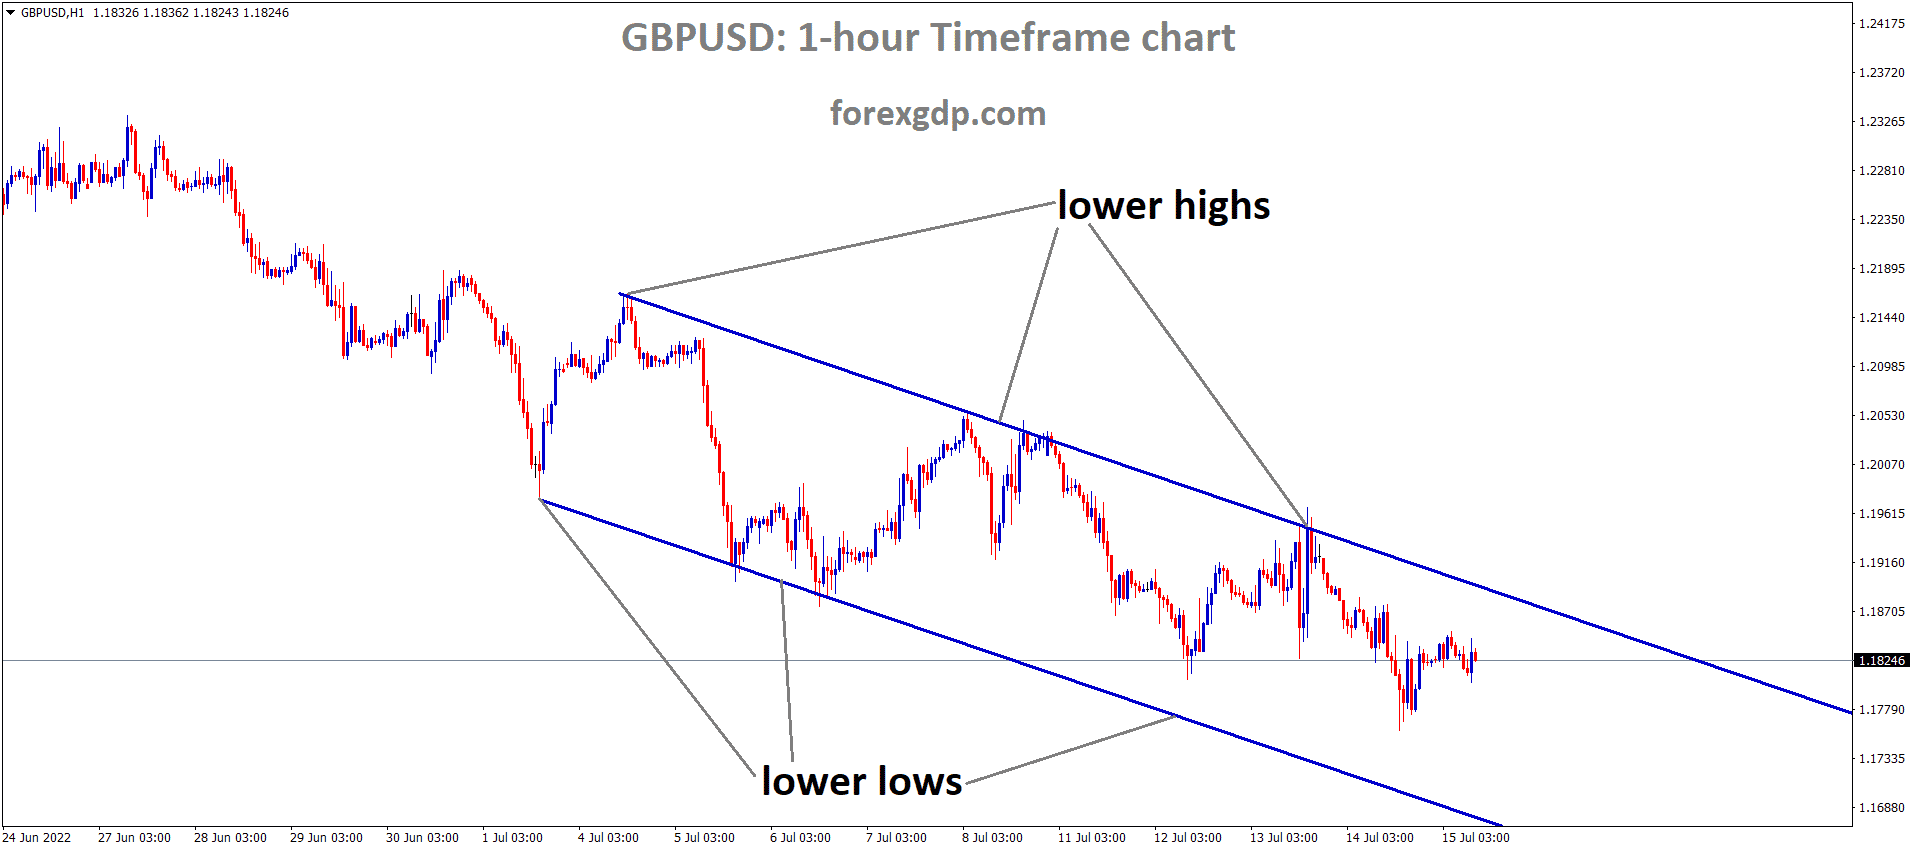 GBPUSD H1 TF analysis Market is moving in the Descending channel and the market has Fallen from the Lower high area of the channel